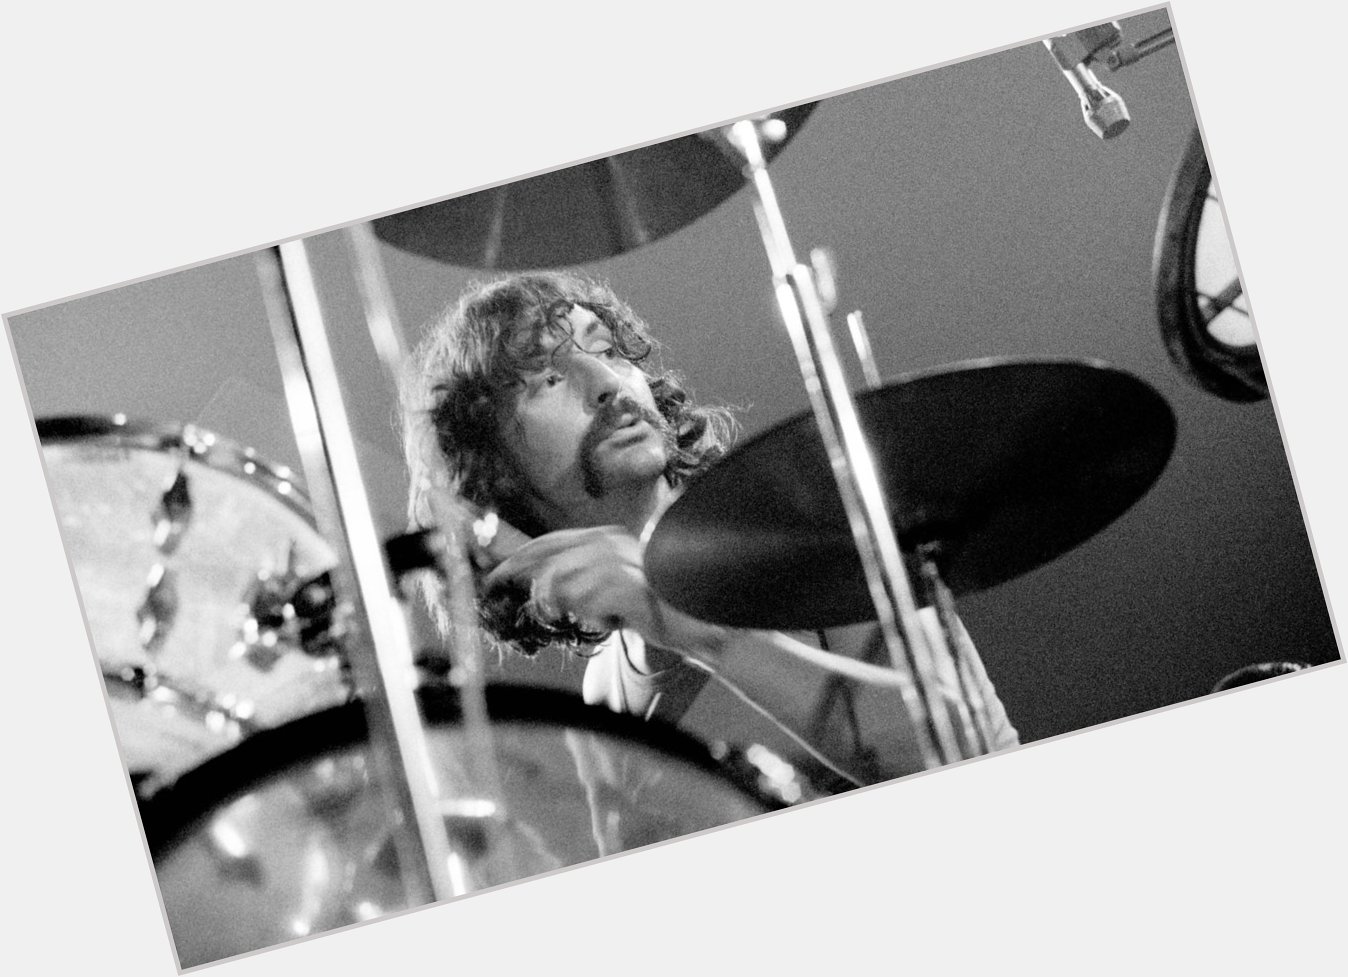 Happy birthday Nick Mason! Check out our recent interview with the Pink Floyd drummer  